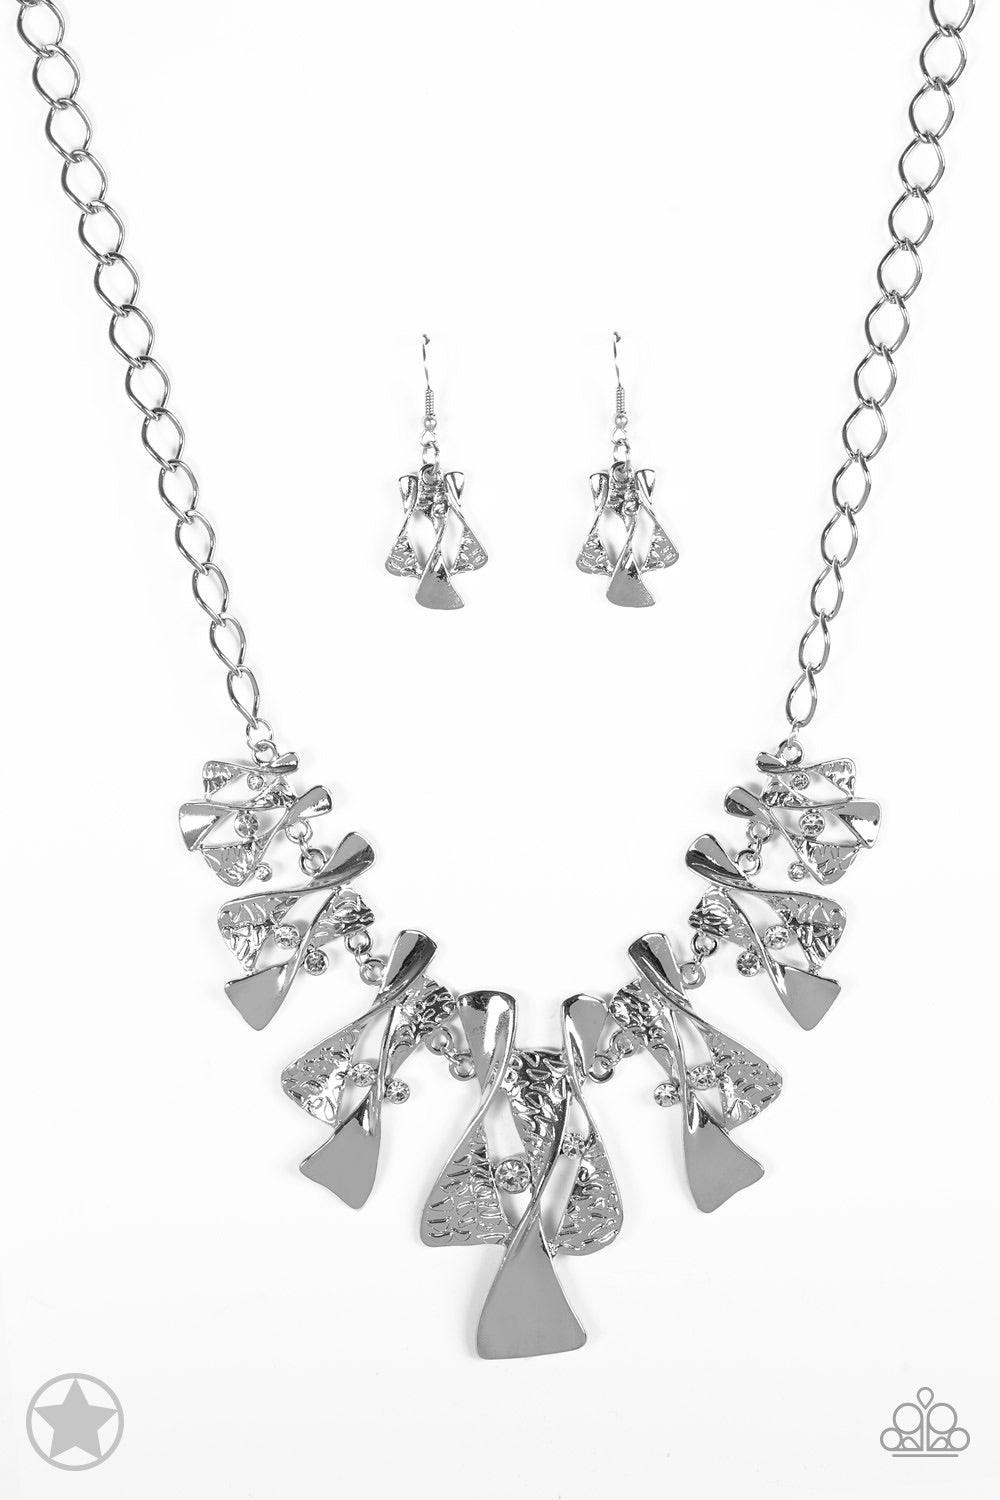 Paparazzi Accessories The Sands Of Time - Silver Twisted silver hourglasses dance along a chunky silver chain with tiny clear rhinestones adding sparkling, elegant accents. Beautiful textured pieces add depth to the design. Features an adjustable clasp cl